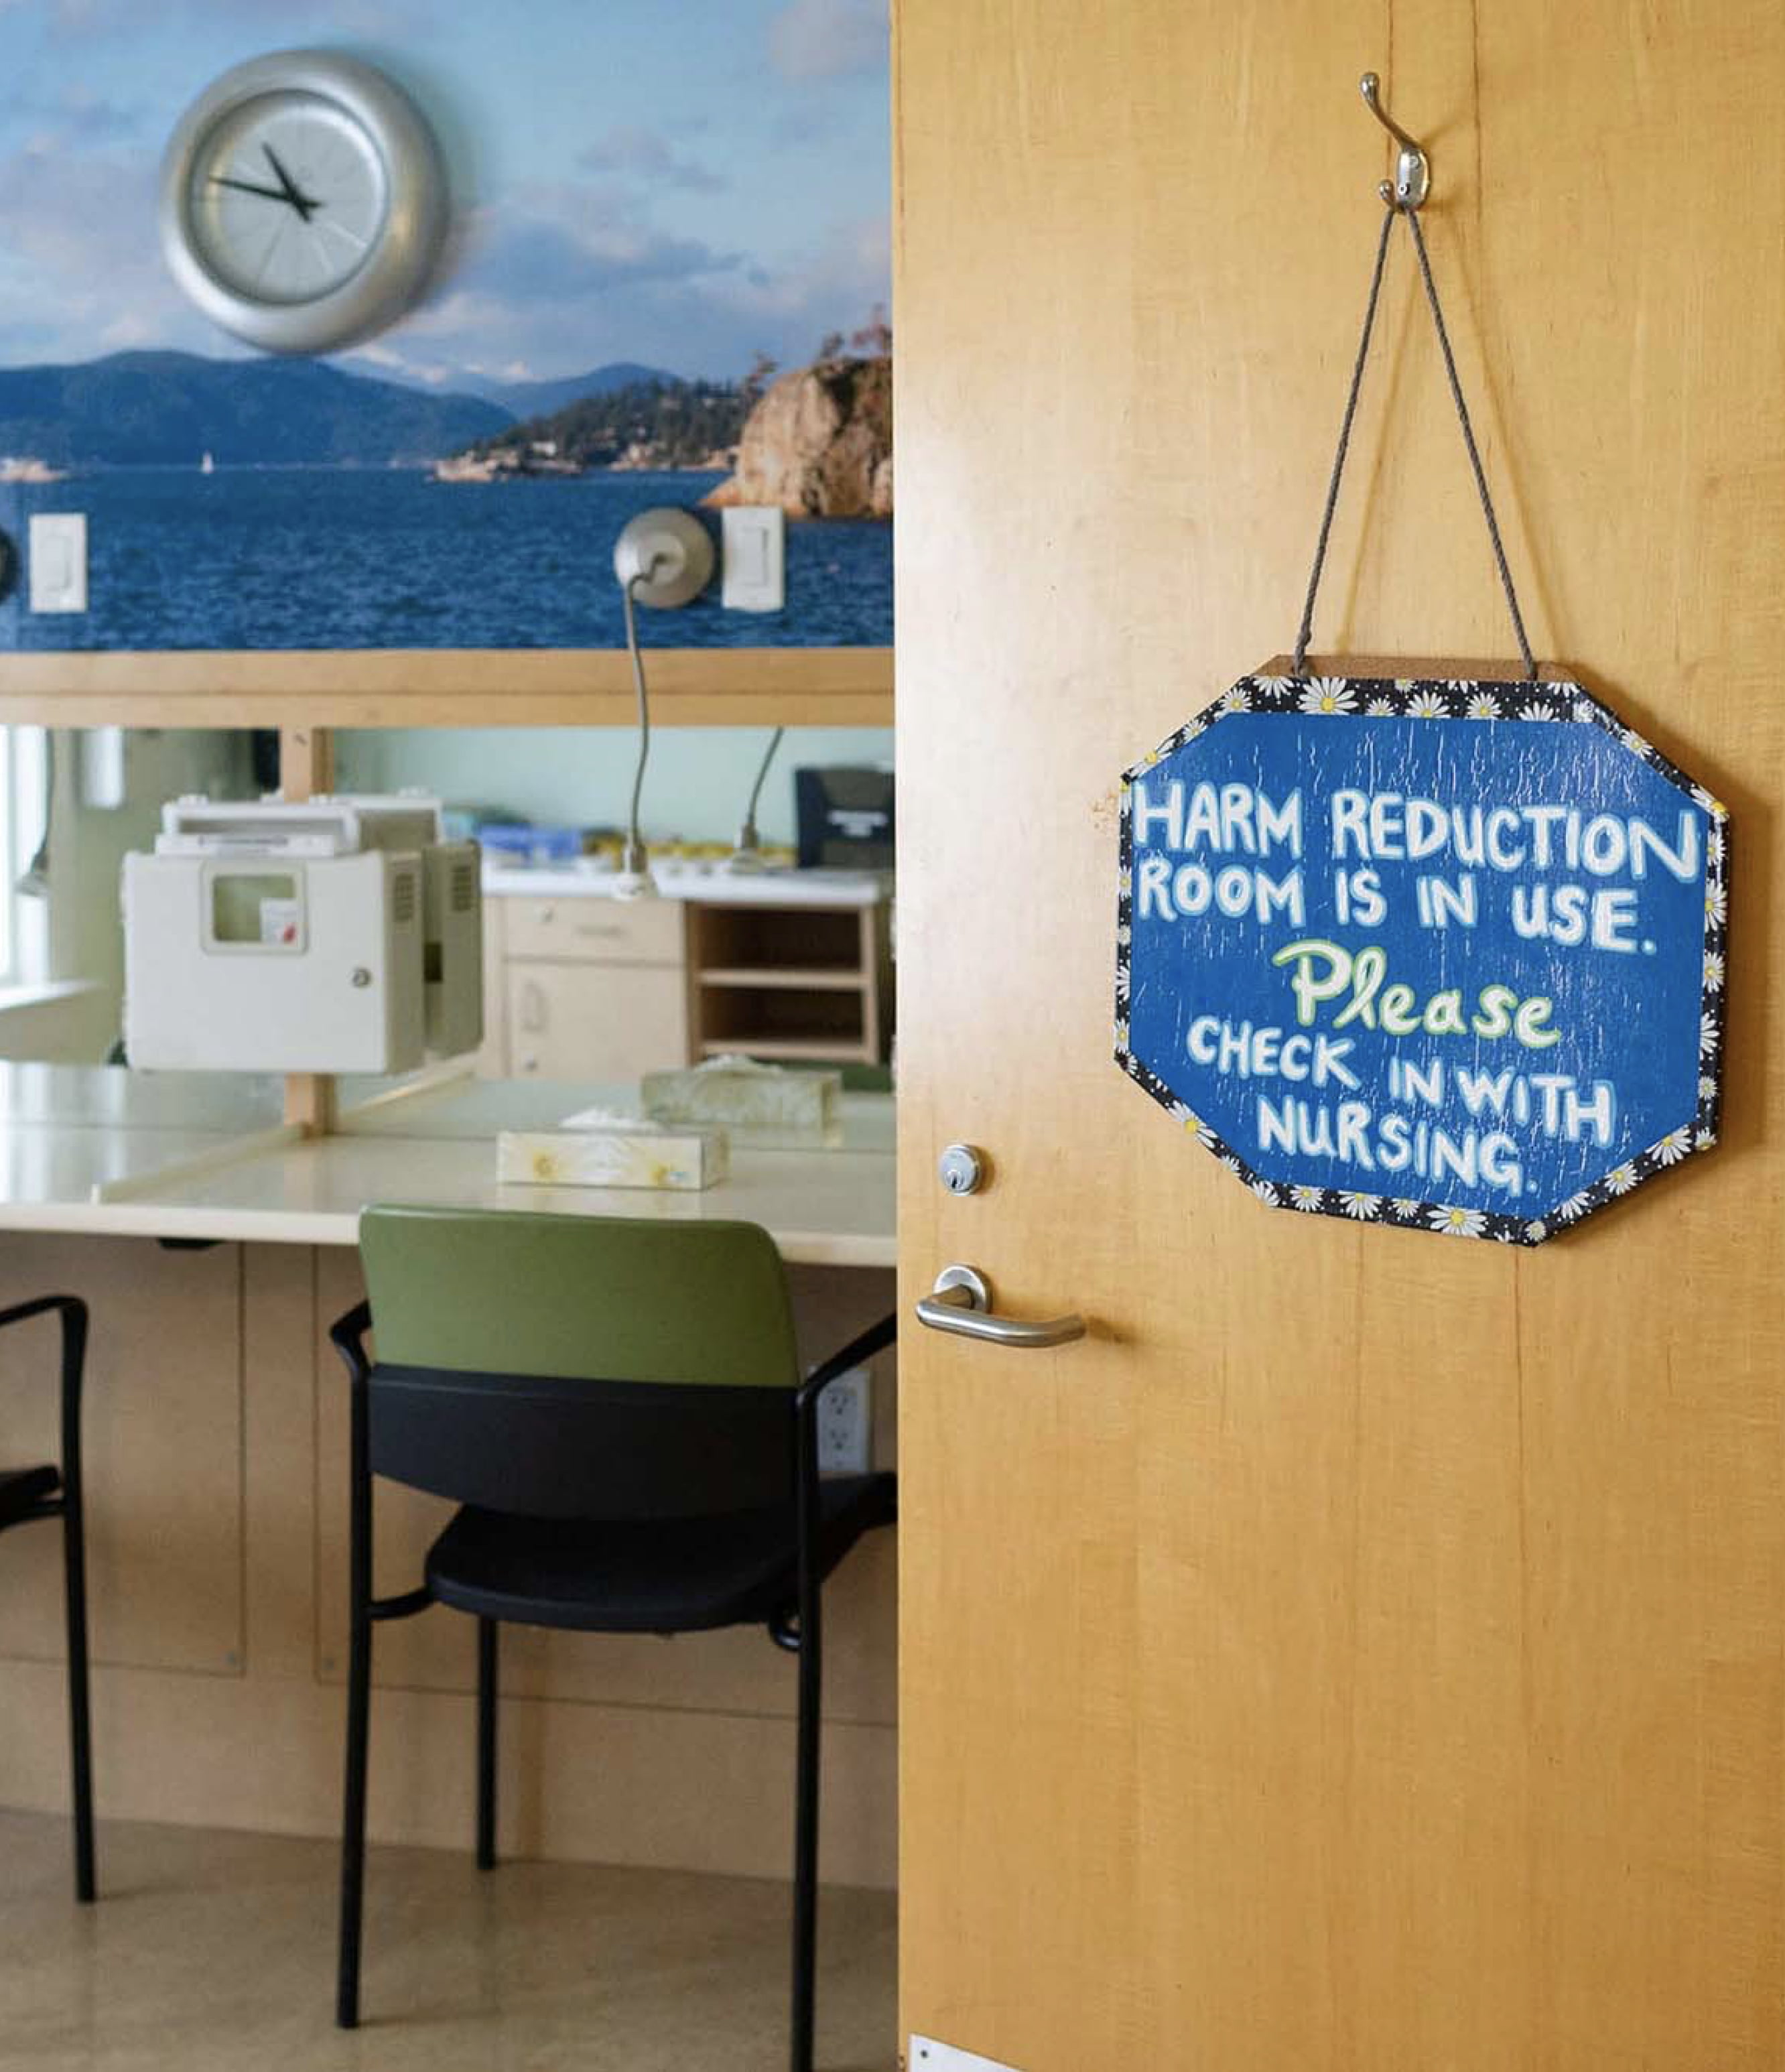 A door opening to a room with chairs with the sign 'Harm reduction room in use. Please check in with nursing' hanging from it.